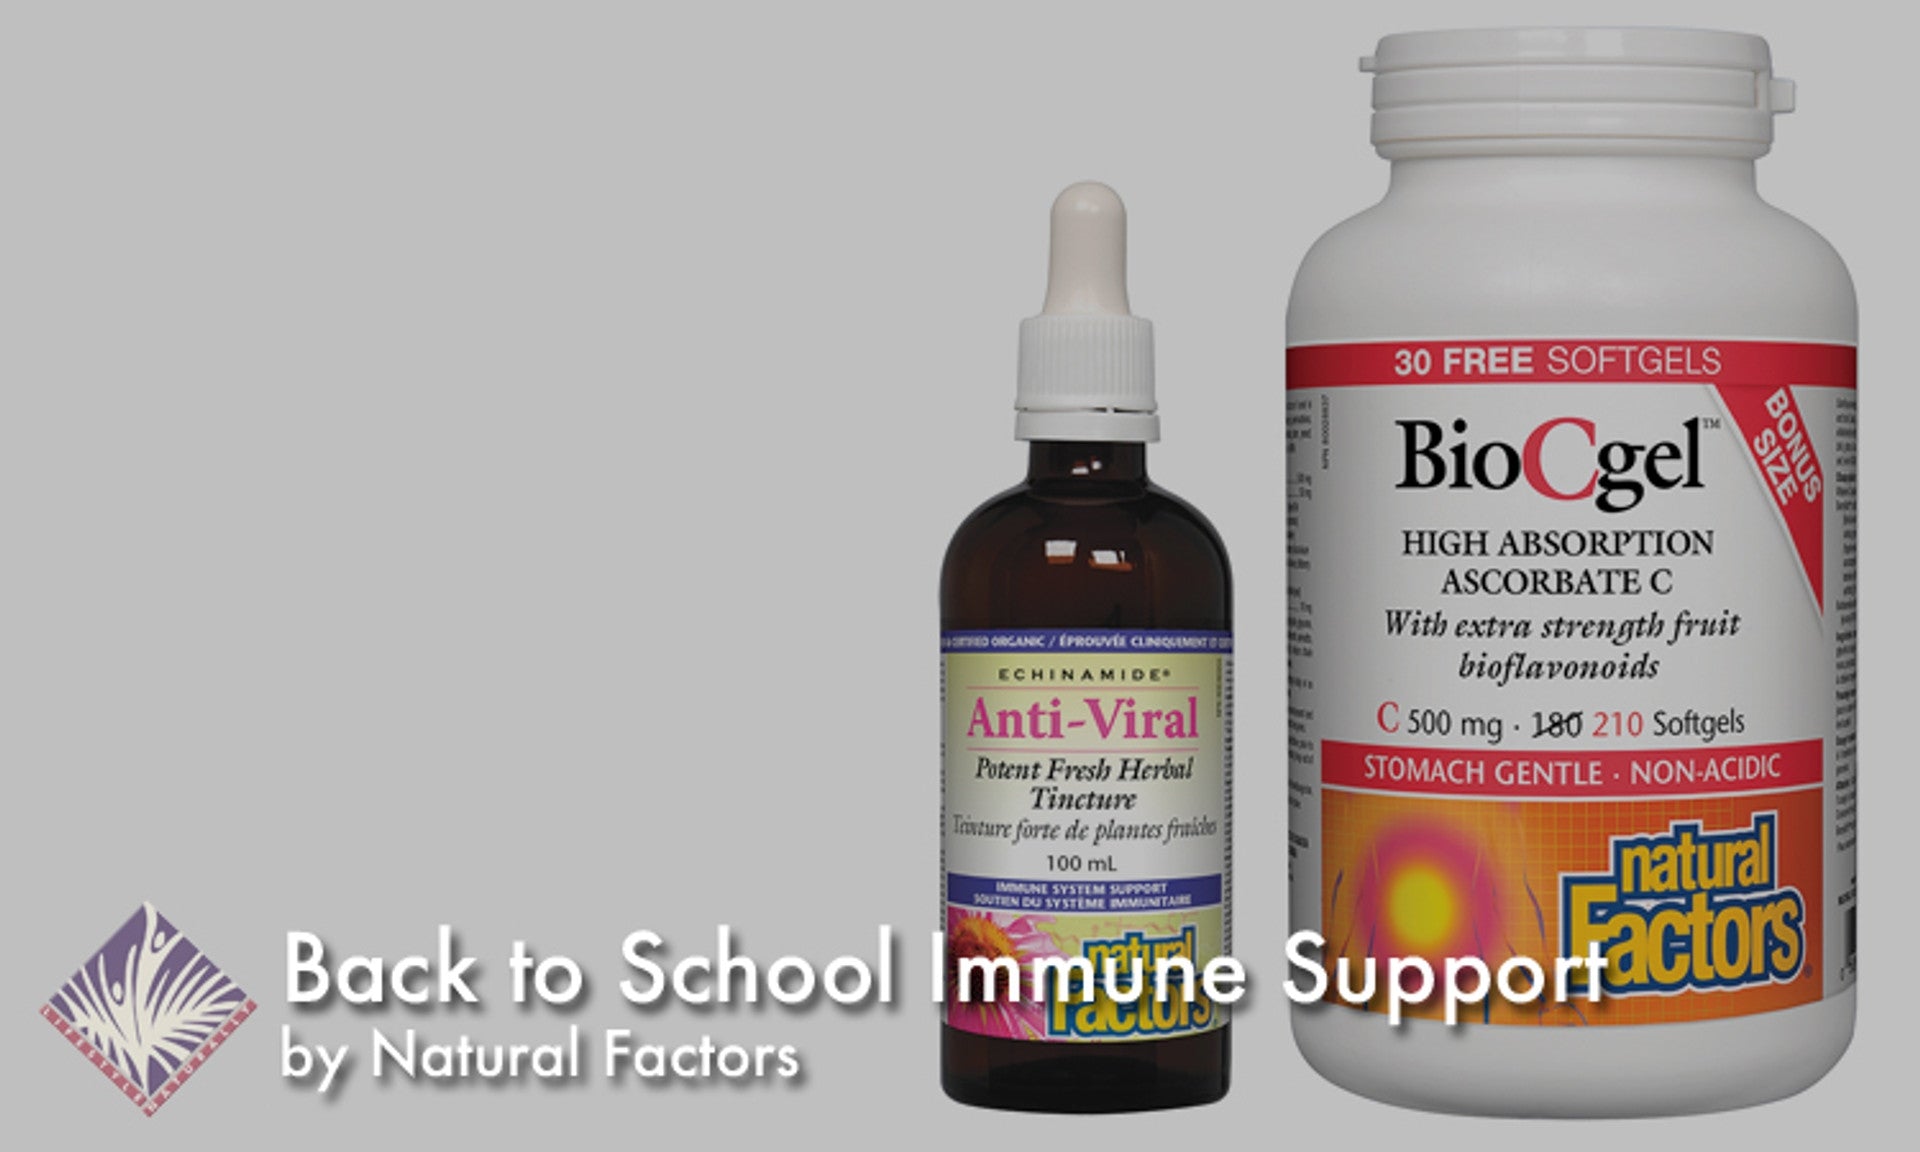 Back to School Immune Support